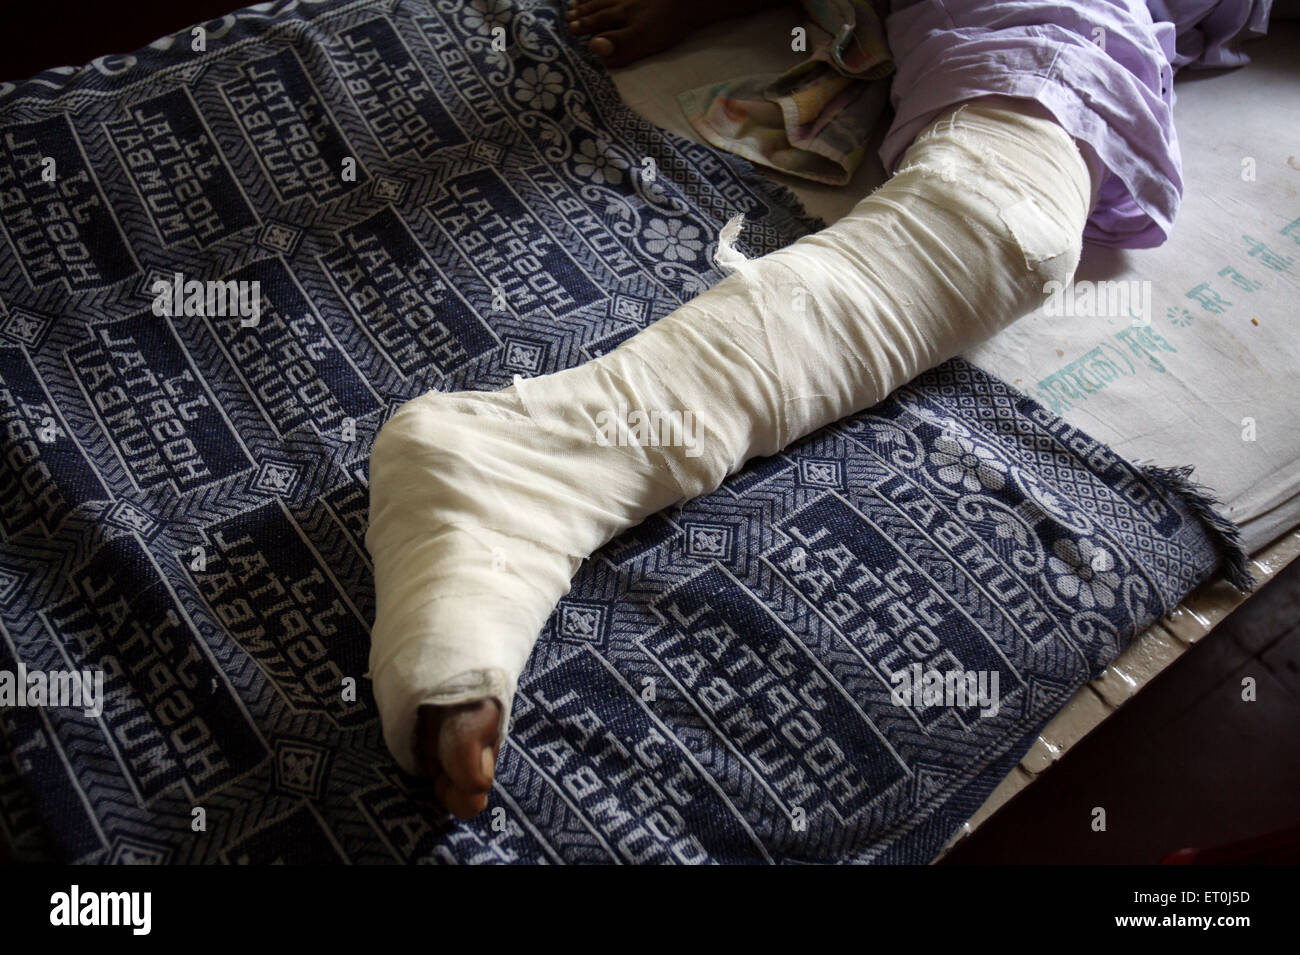 Injured foot ; Victim of terrorist attack by Deccan Mujahedeen on 26th November 2008 treated in J.J. hospital in Bombay Stock Photo